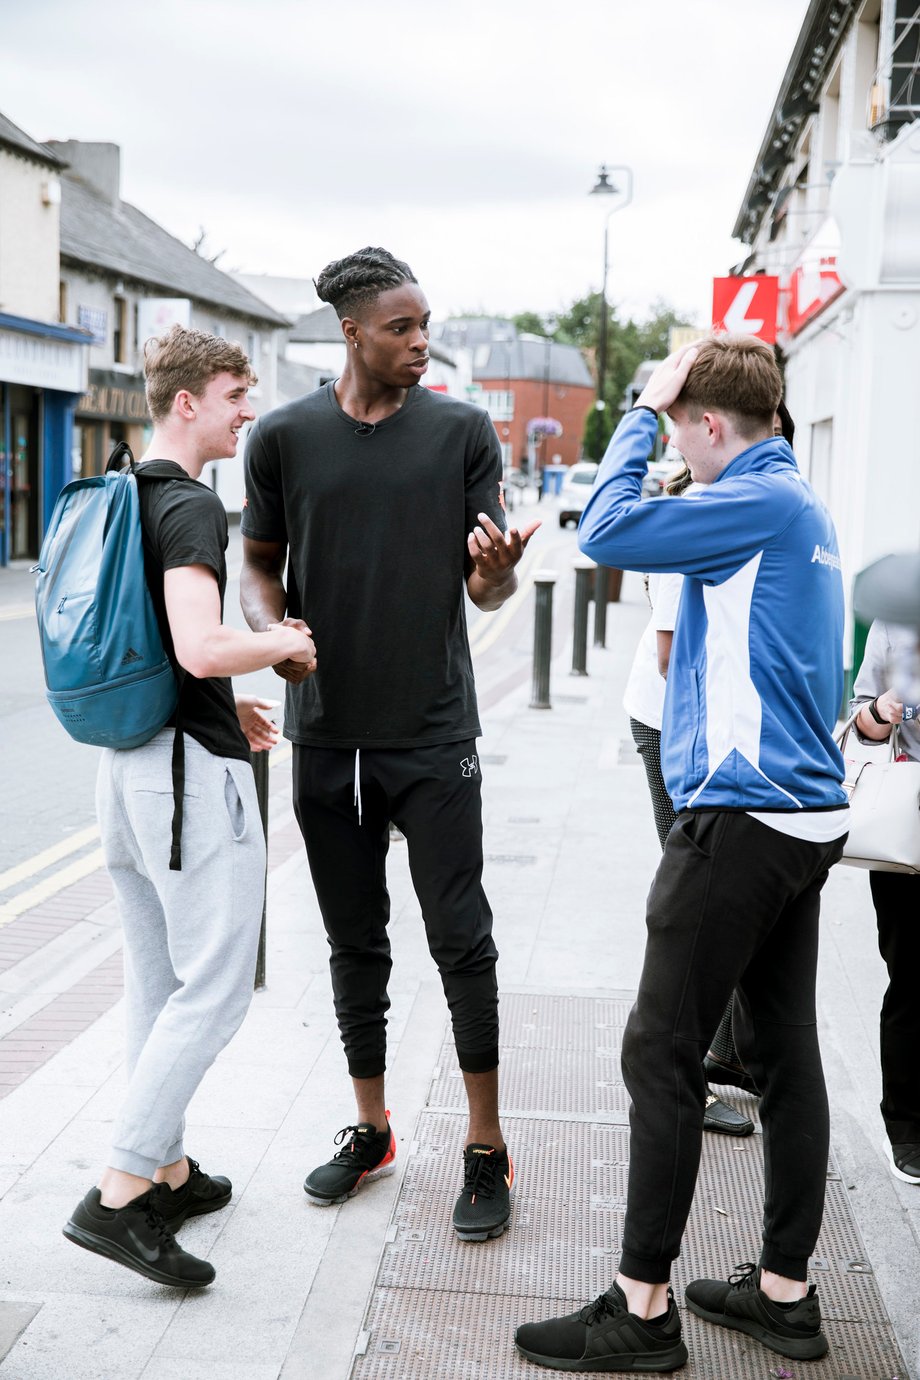 Johnnie Izquierdo catches teens wanting to talk to Aidan as they walk through the streets